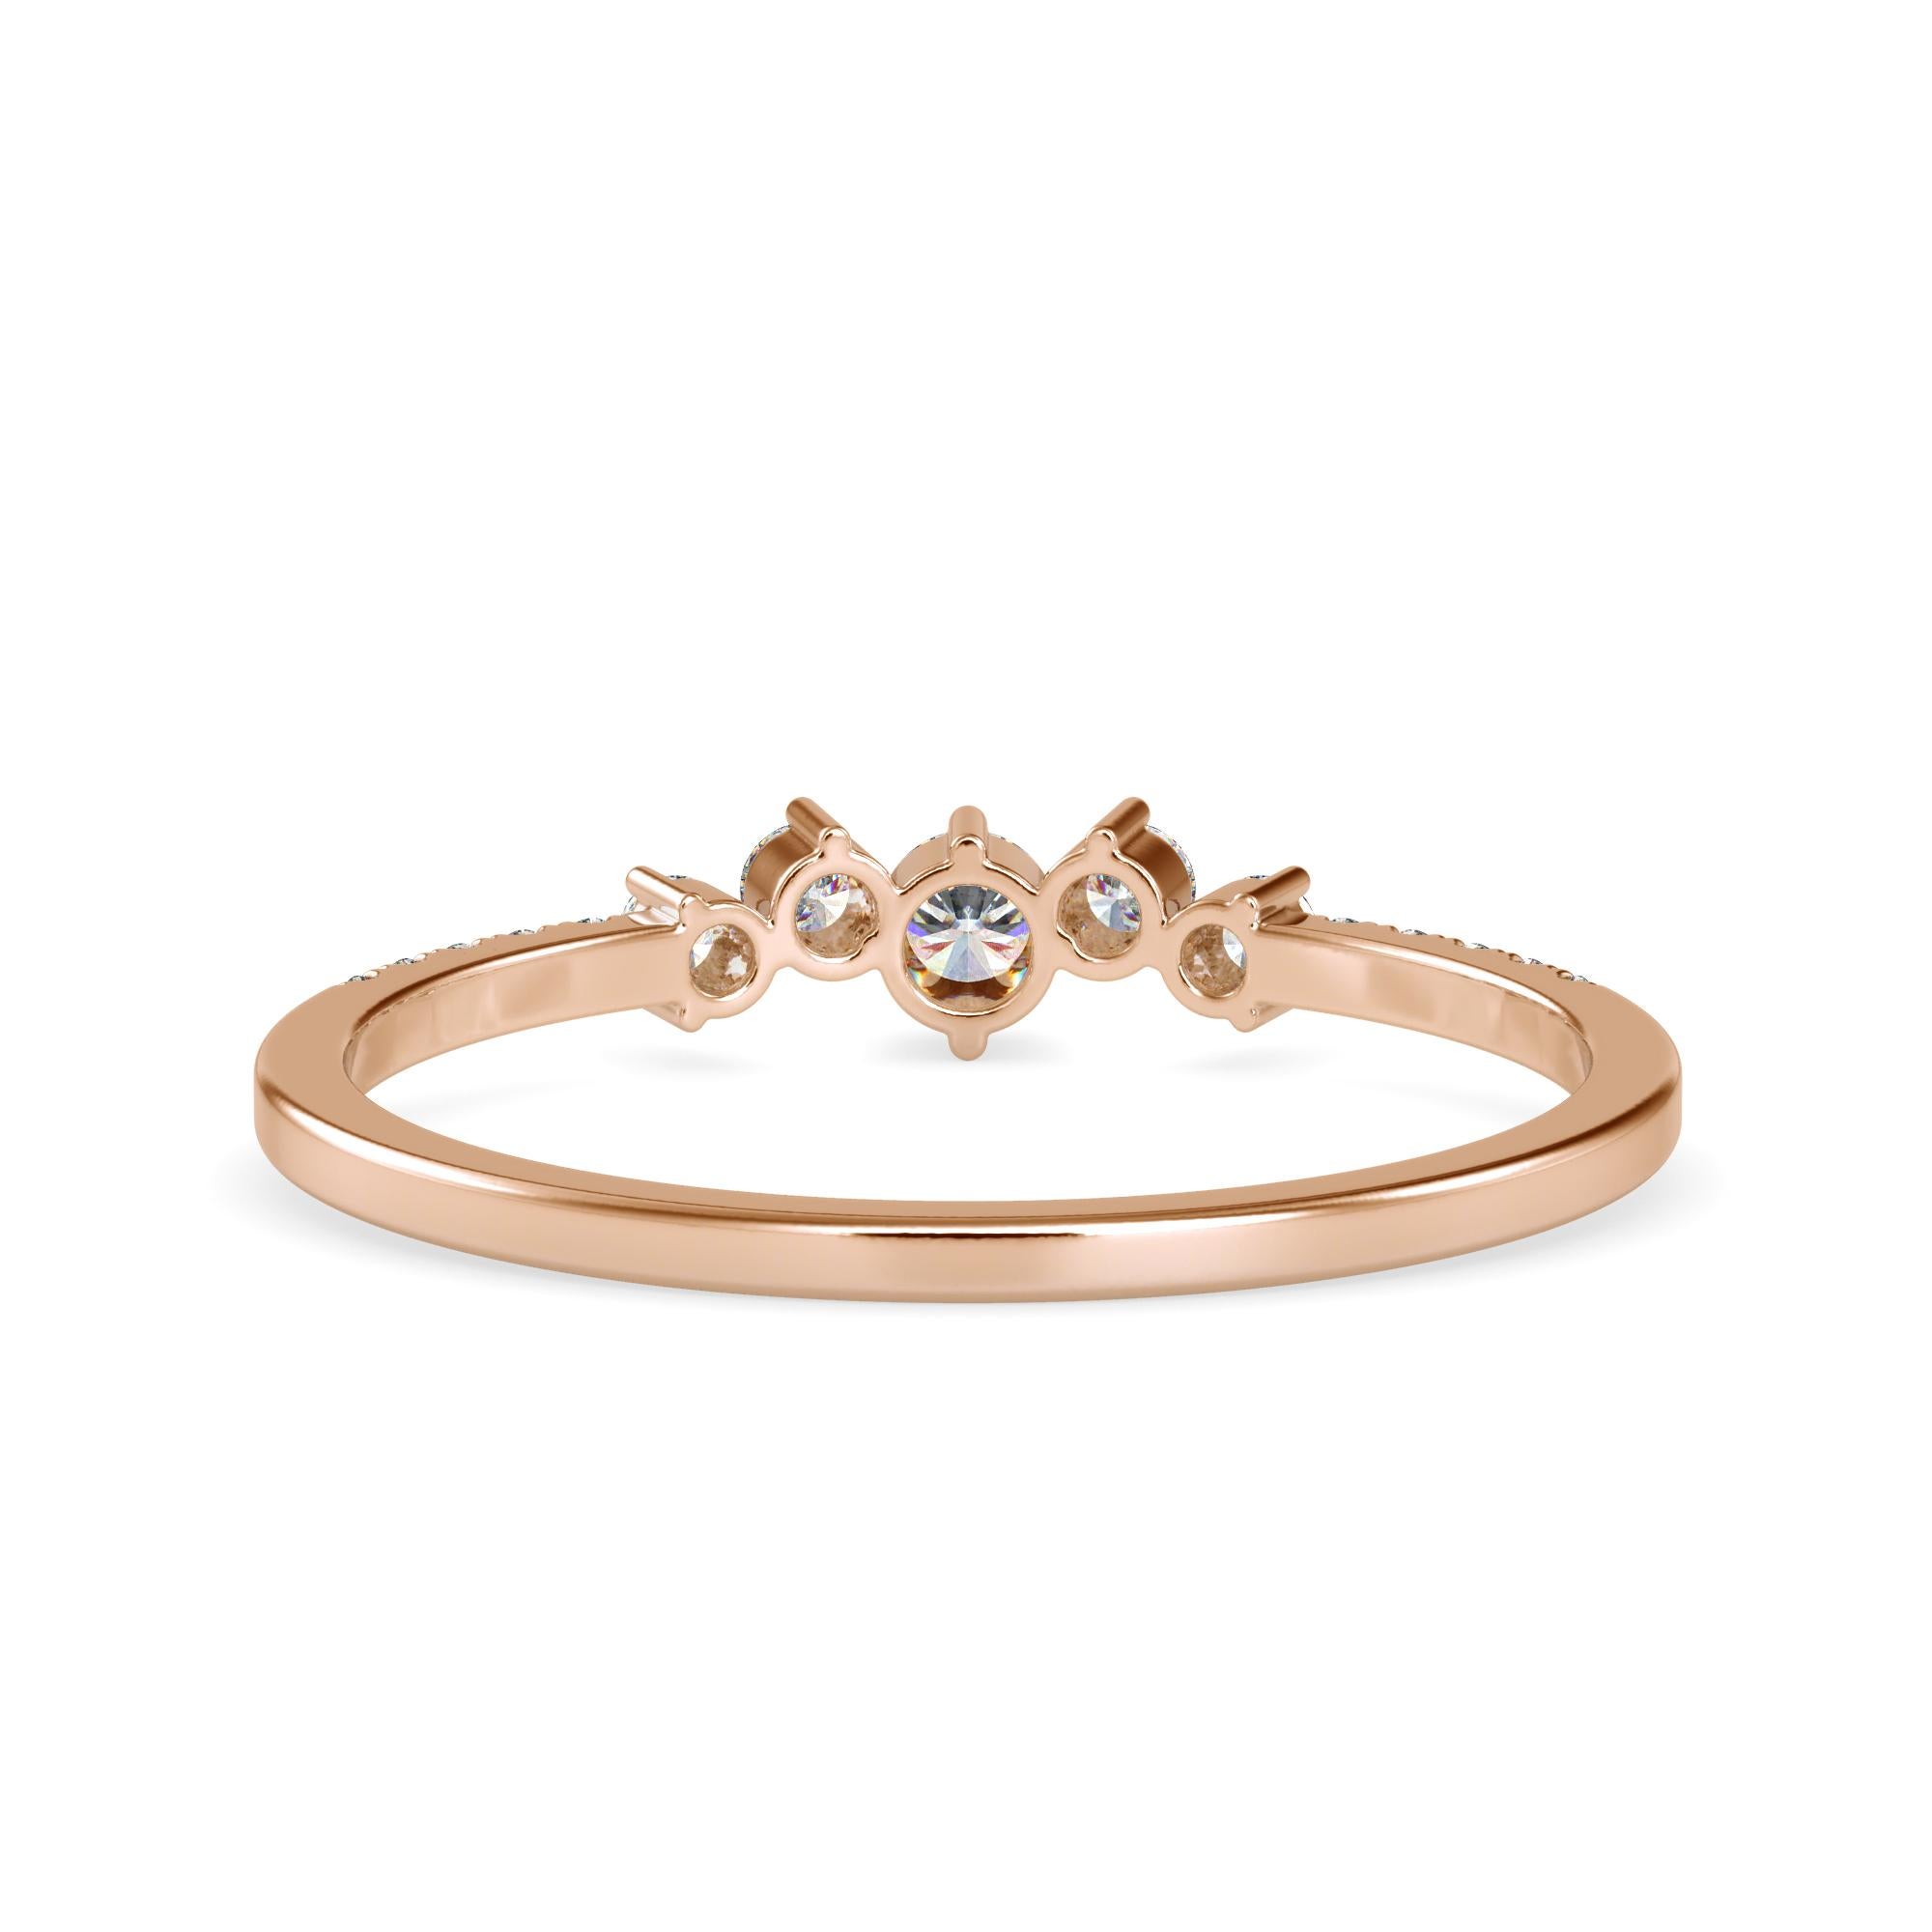 0.16 Carat Diamond 14K Rose Gold Ring In New Condition For Sale In Los Angeles, CA